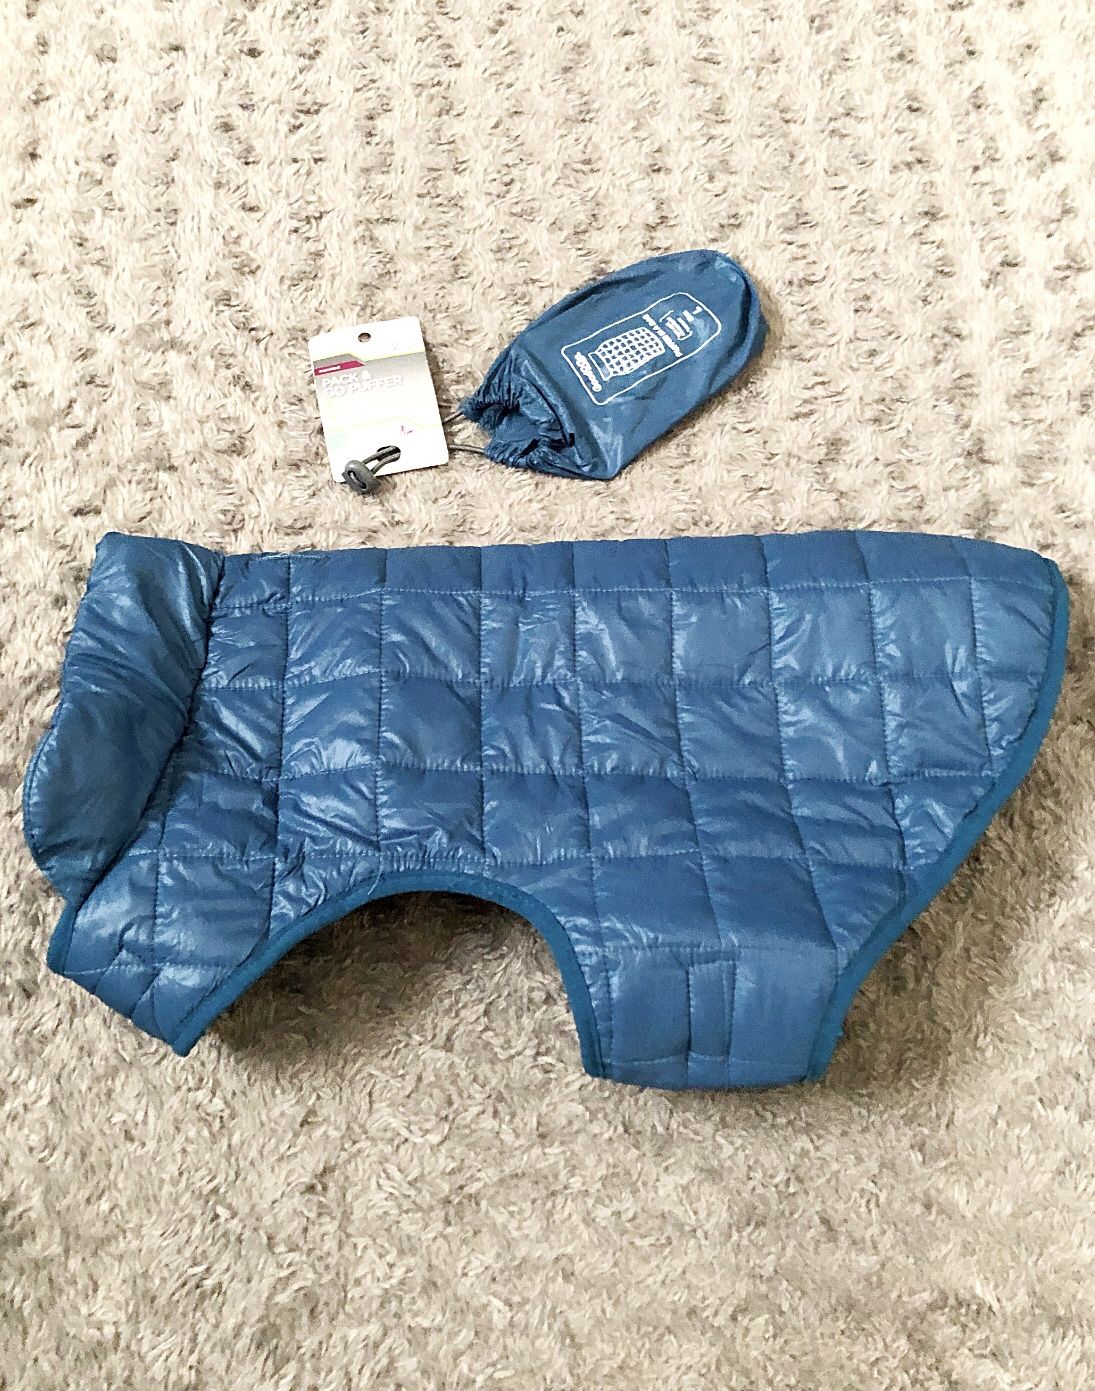 New! Dog Puffer Jacket Paid $25 size L Pack & Go! Warm Light Weight jacket. Measures 17-19in Brand new never used with tags!